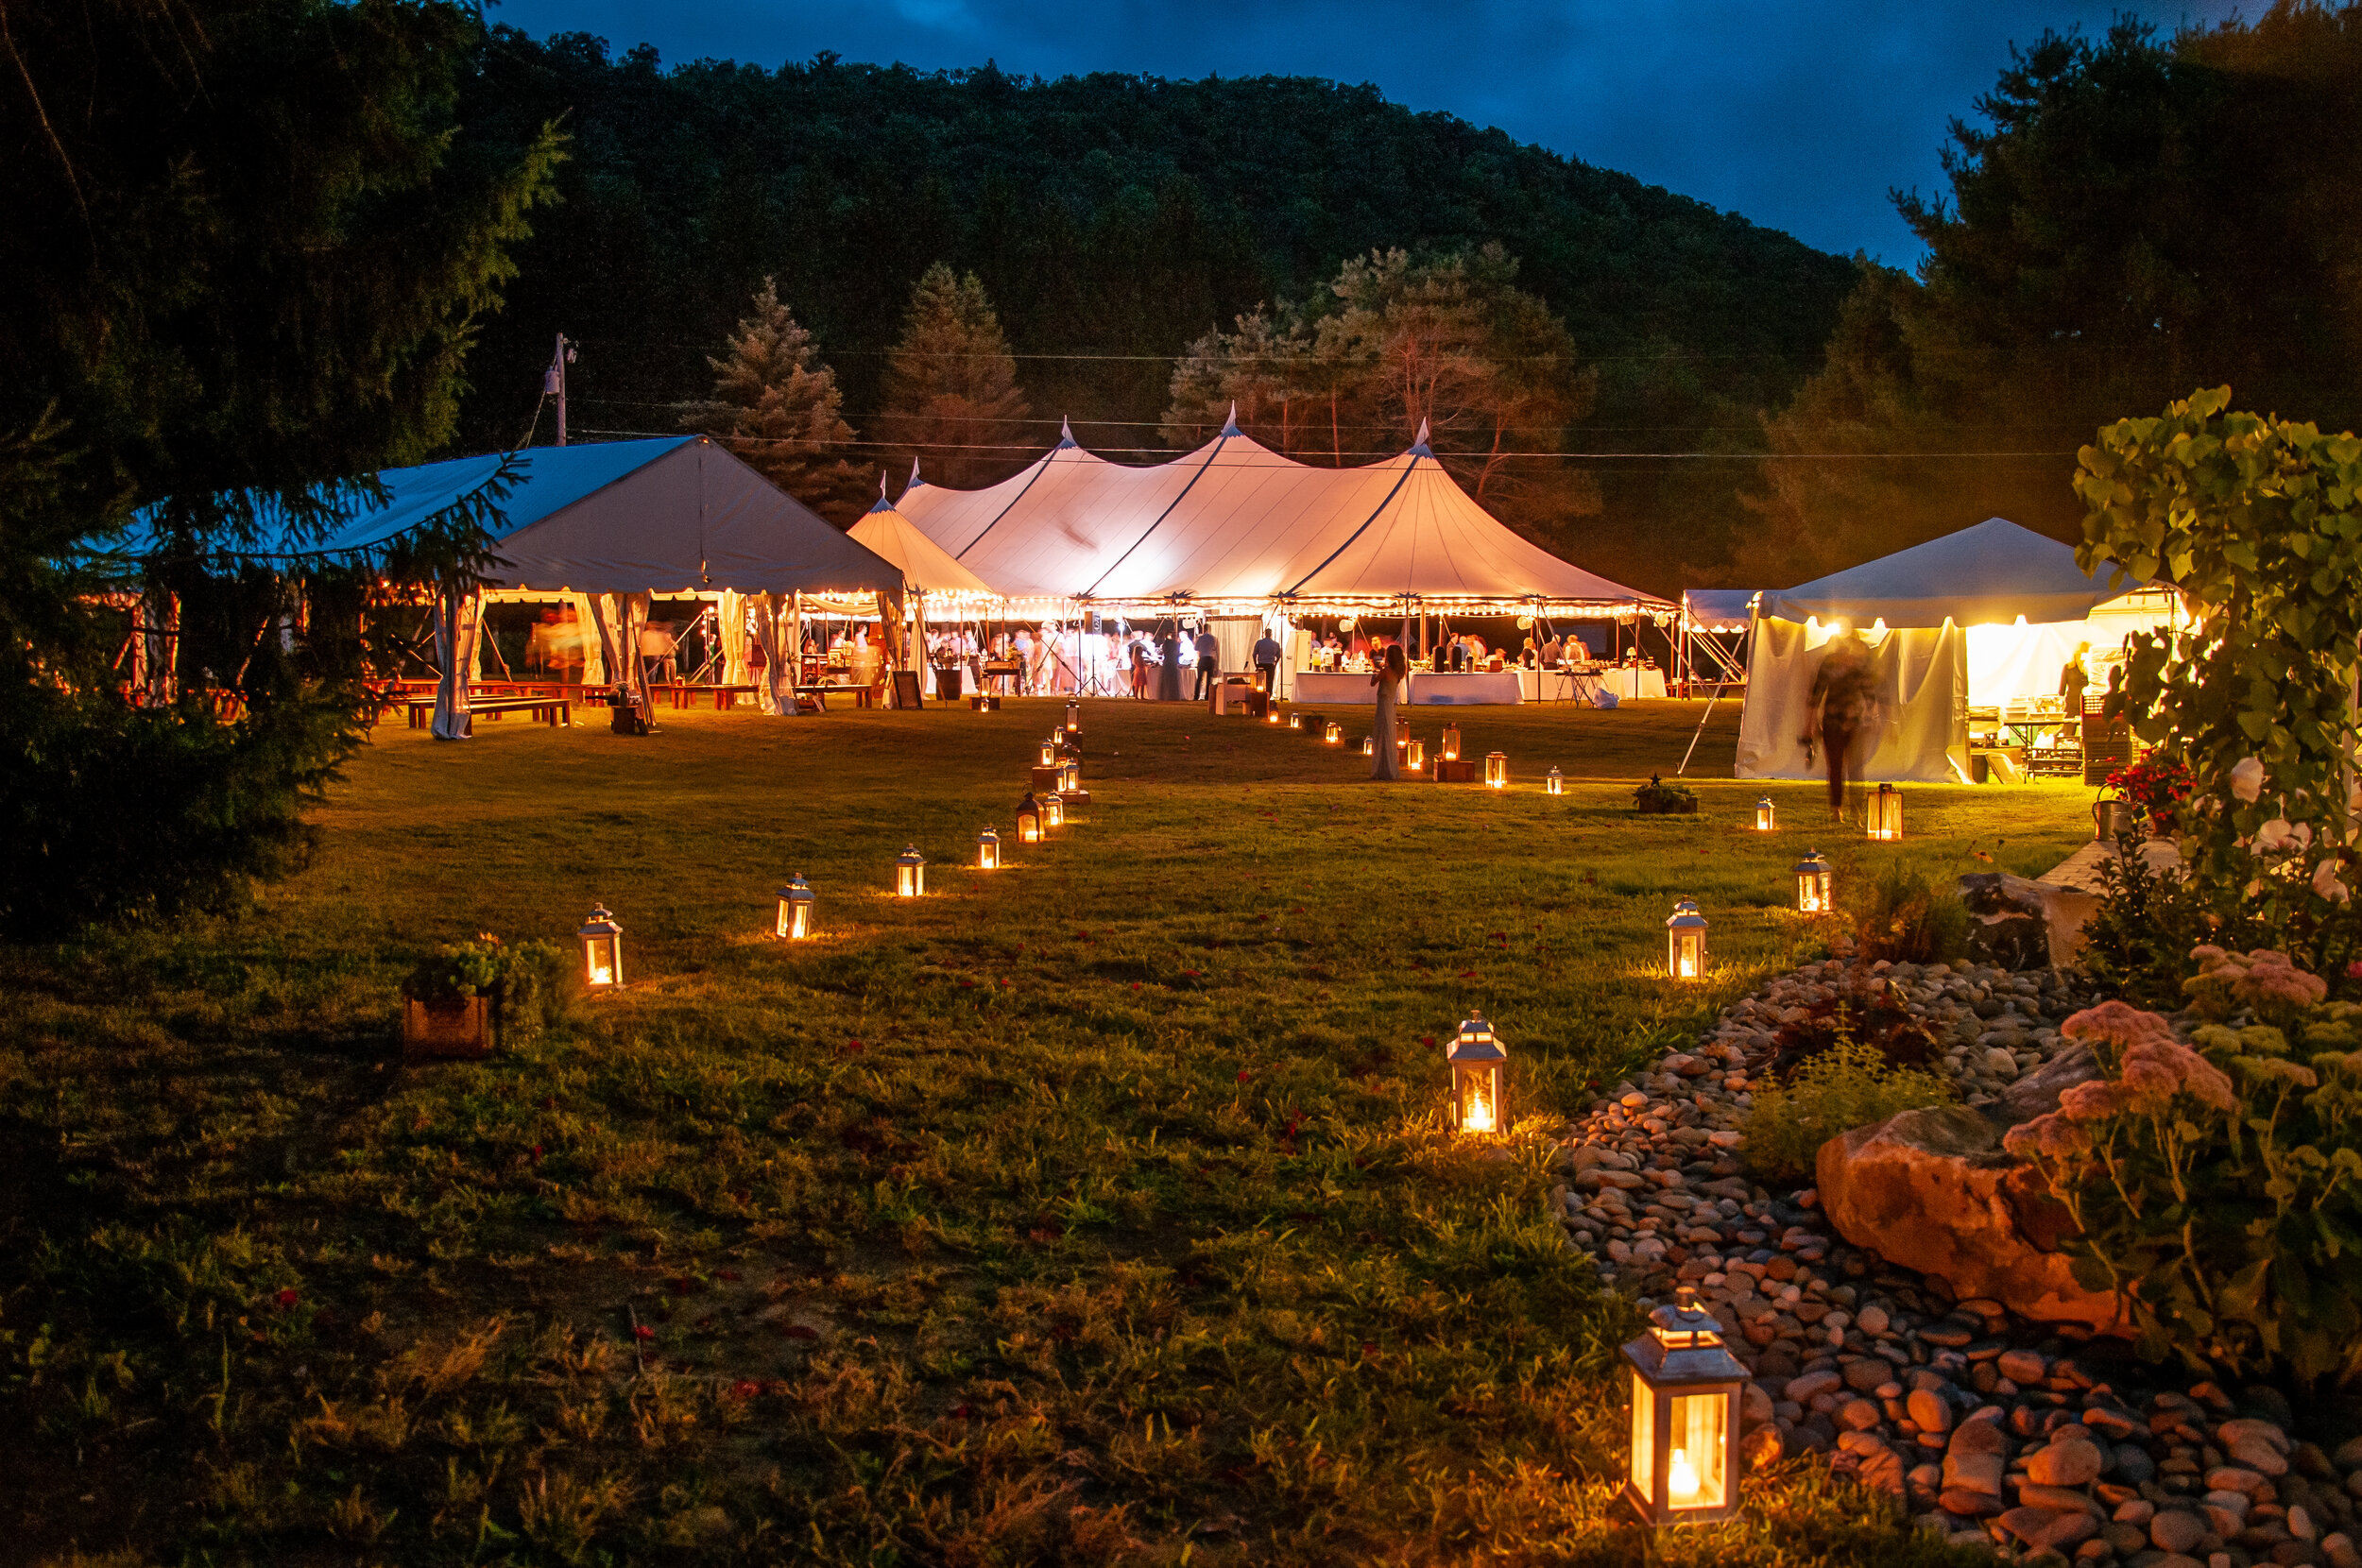 Wedding Tent Rental Packages on the East Coast | Tents For Rent